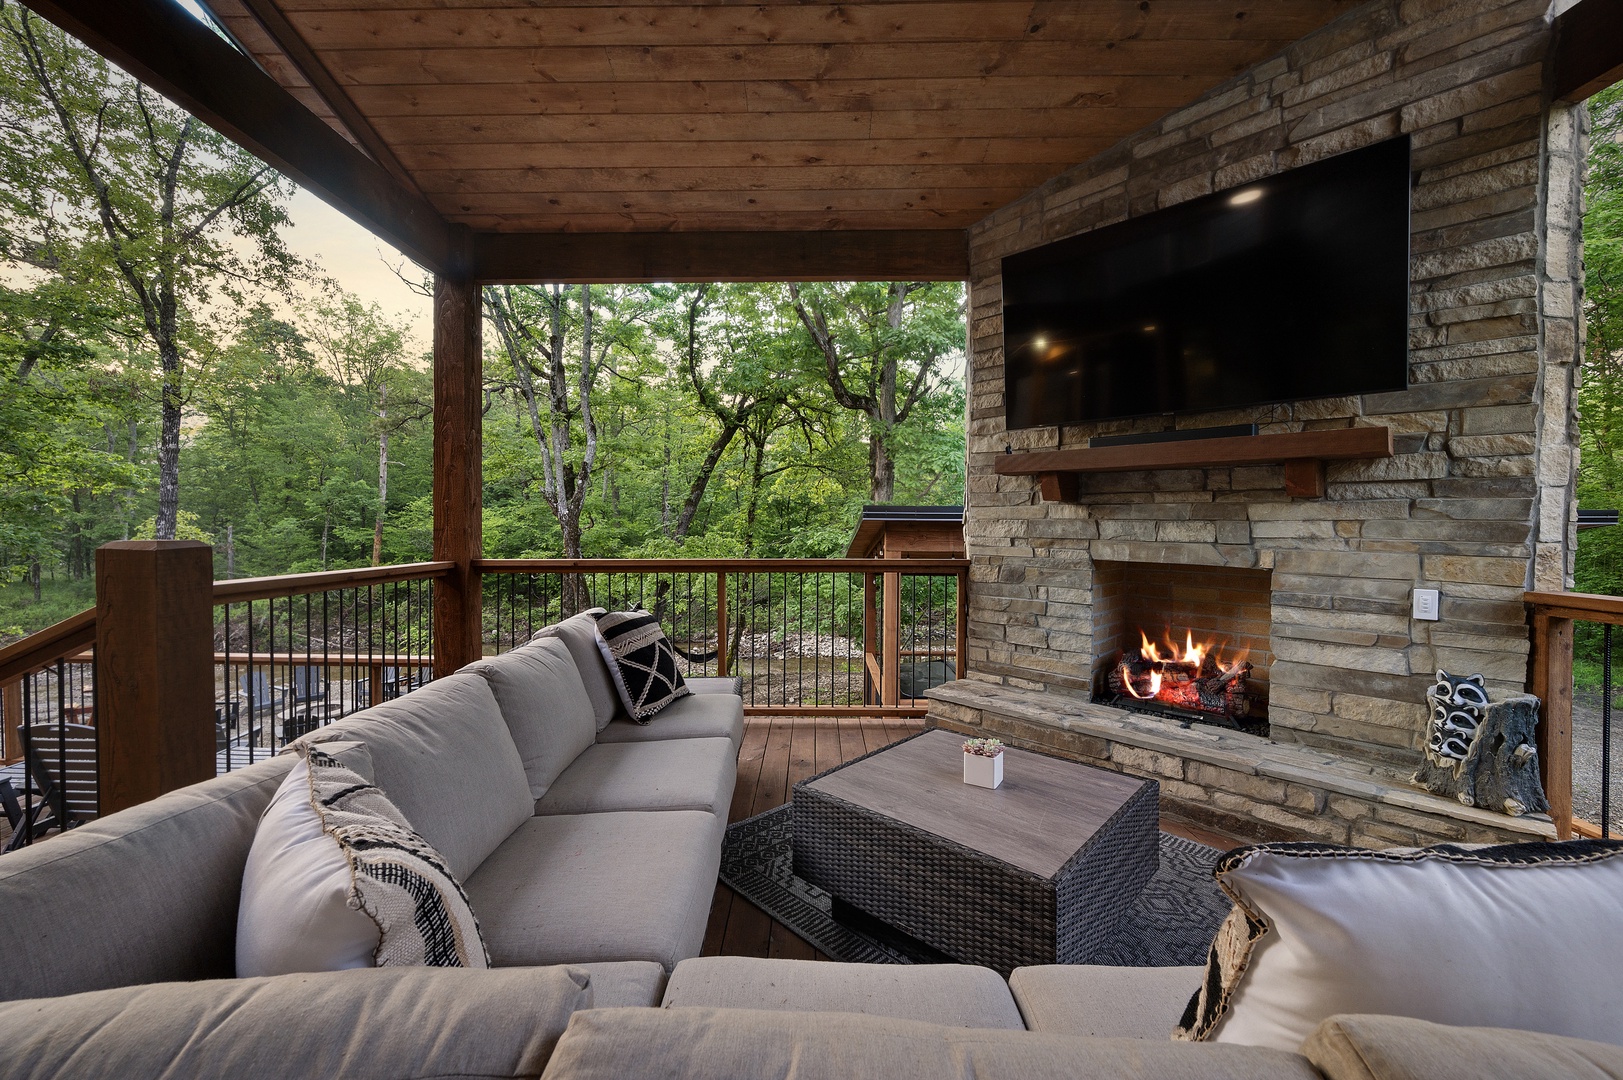 Outdoor entertaining area with sectional seating, gas fireplace, and TV